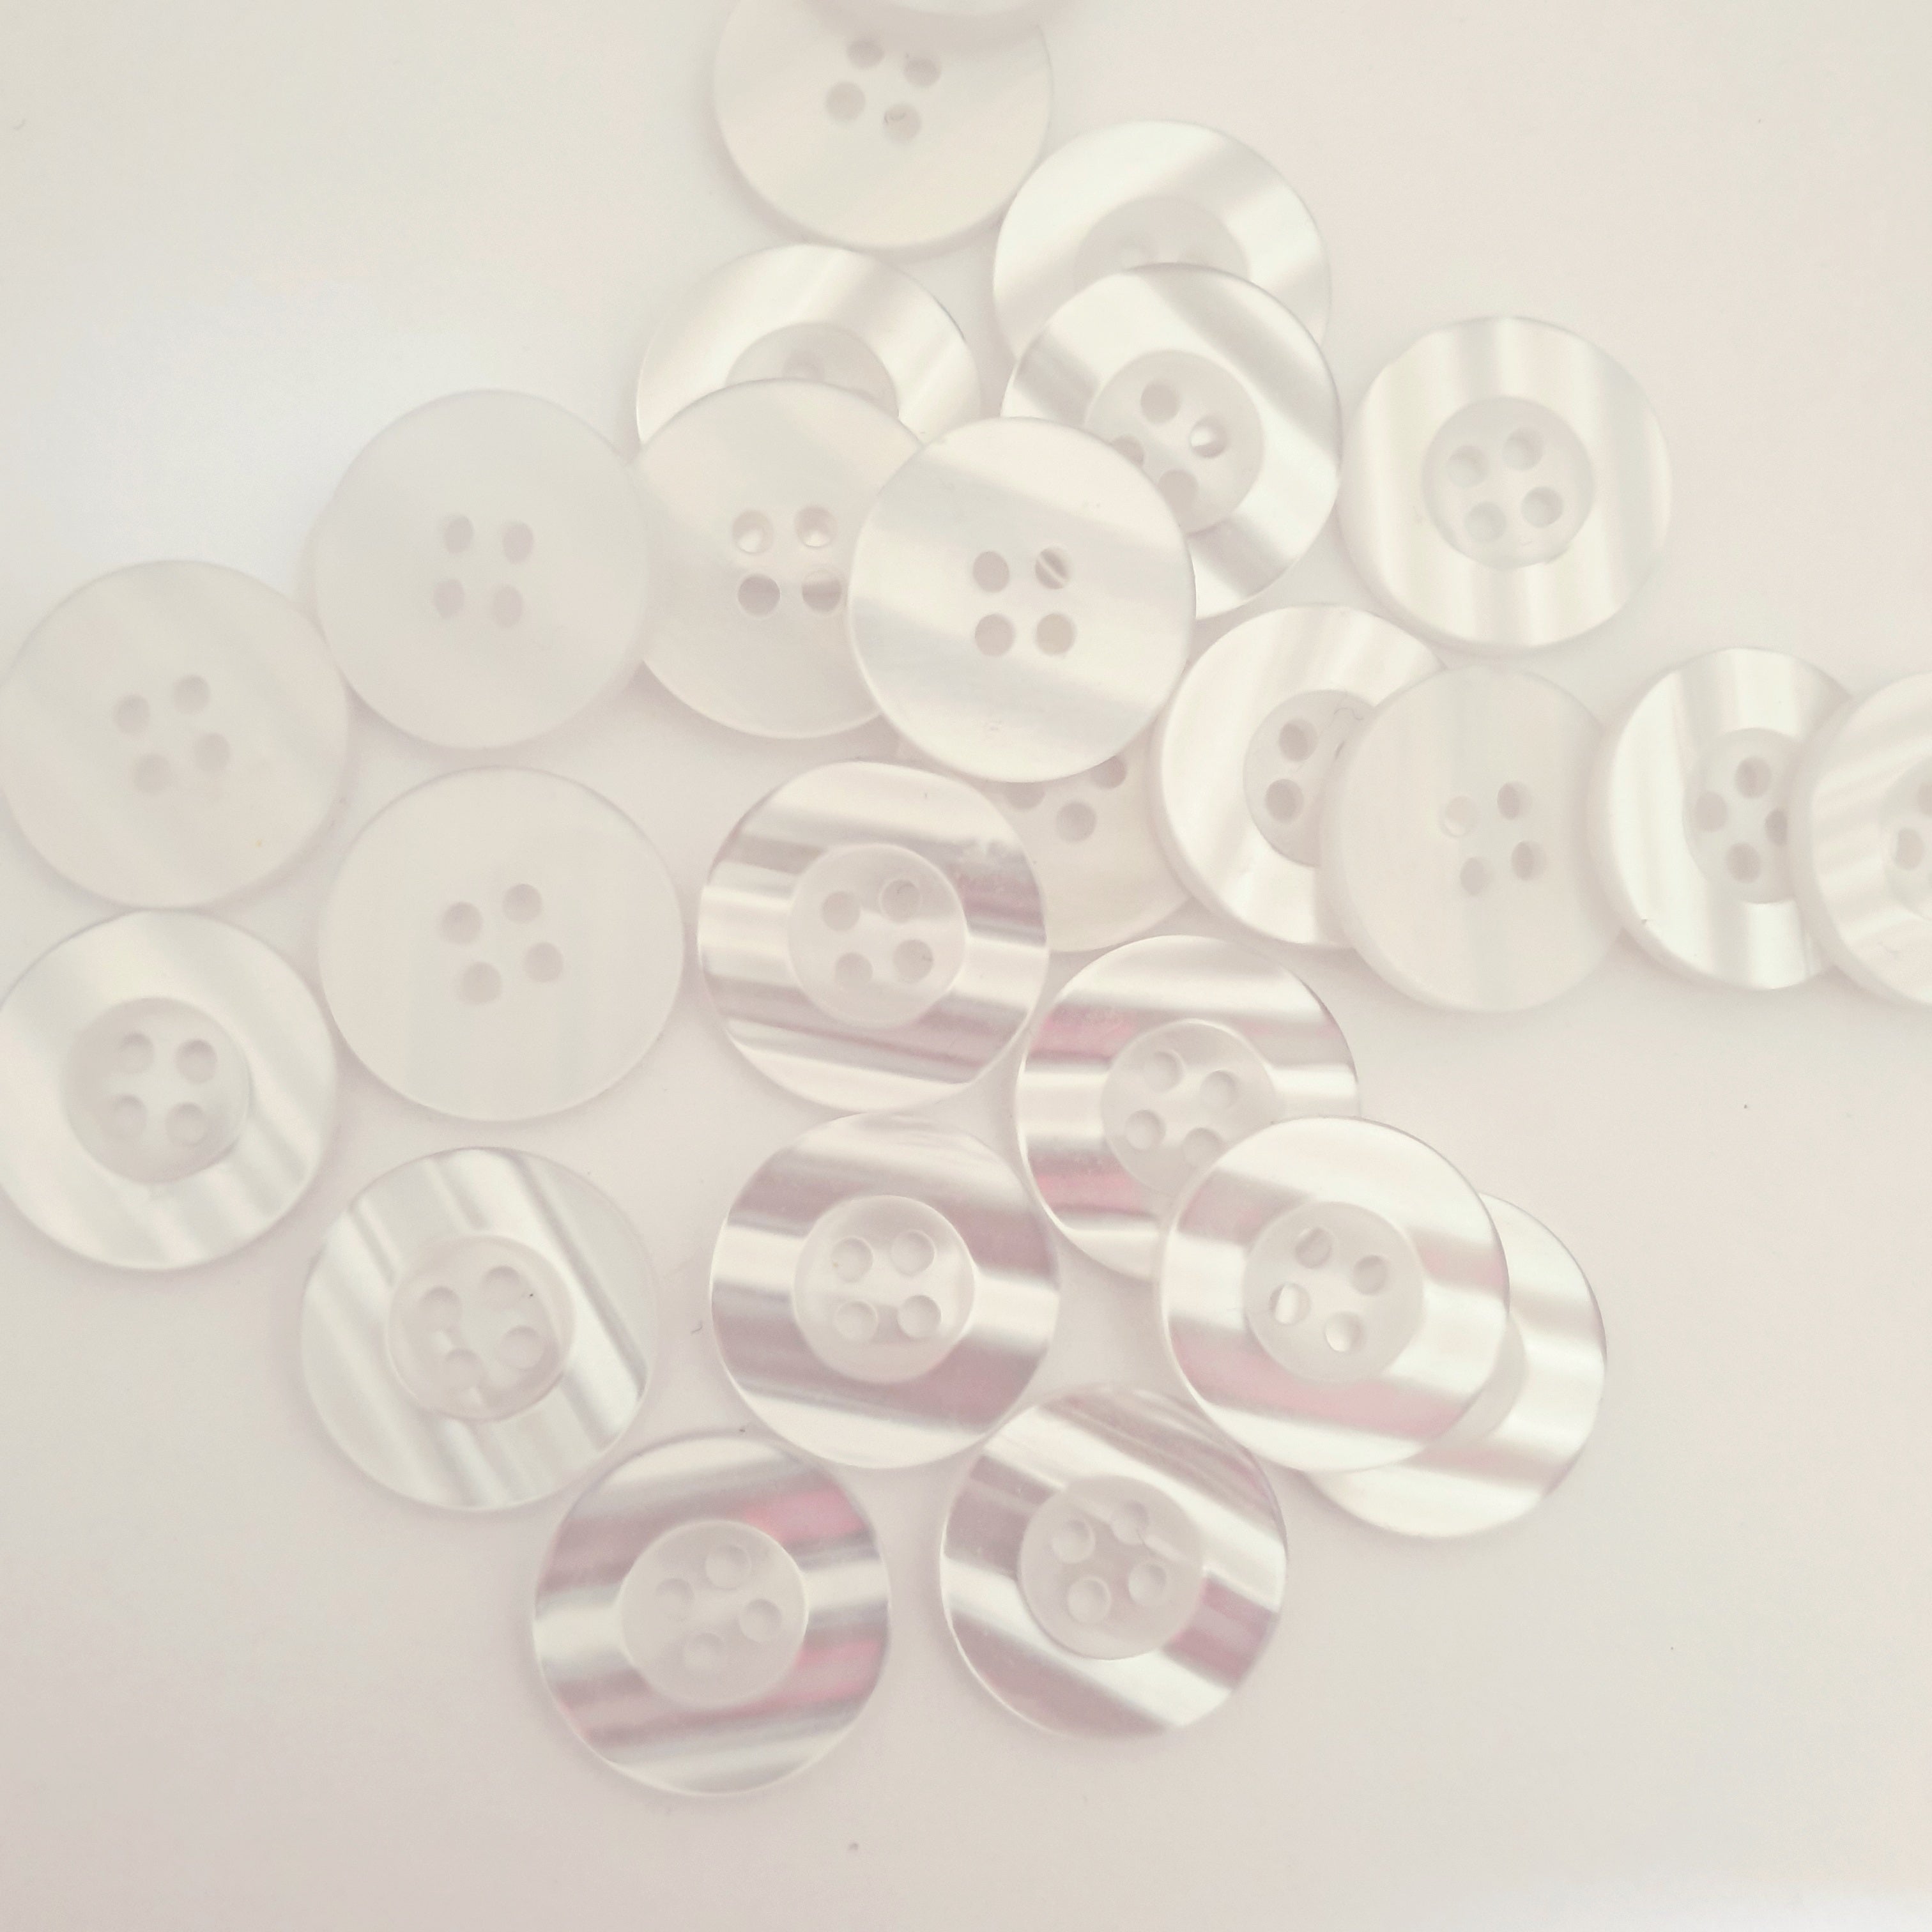 MajorCrafts 30pcs 20mm Clear White Pearlescent 4 Holes Round Resin Sewing Buttons